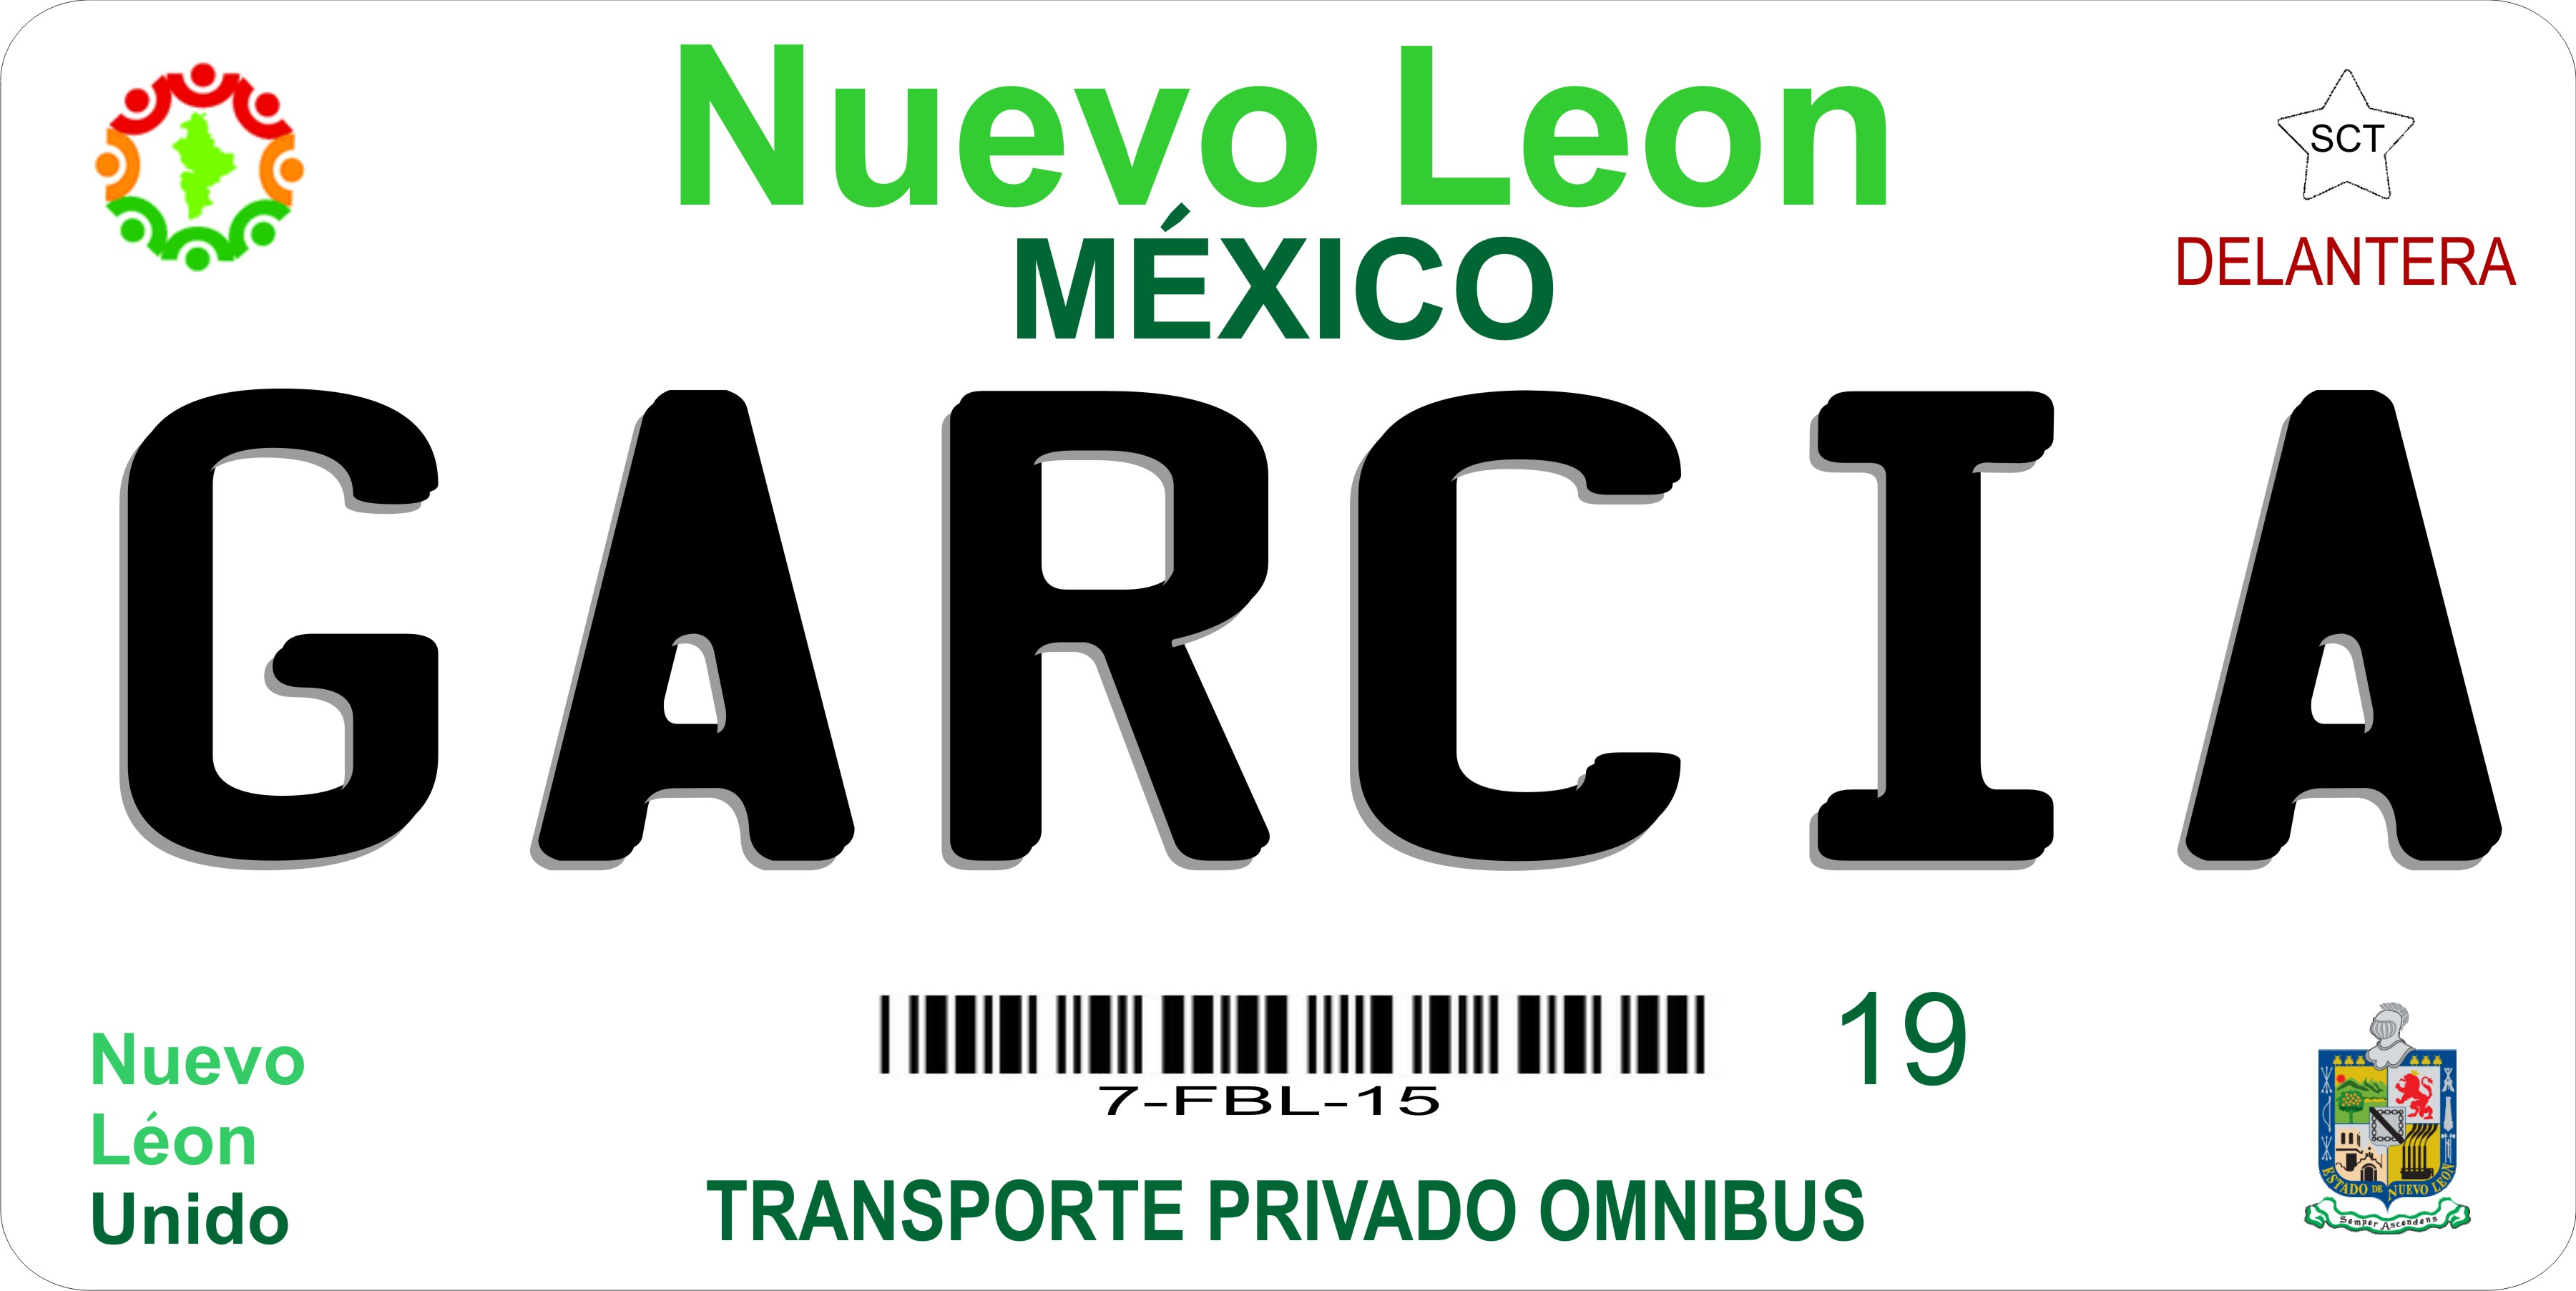 Mexico Nuevo Leon Photo LICENSE PLATE  Free Personalization on this PLATE